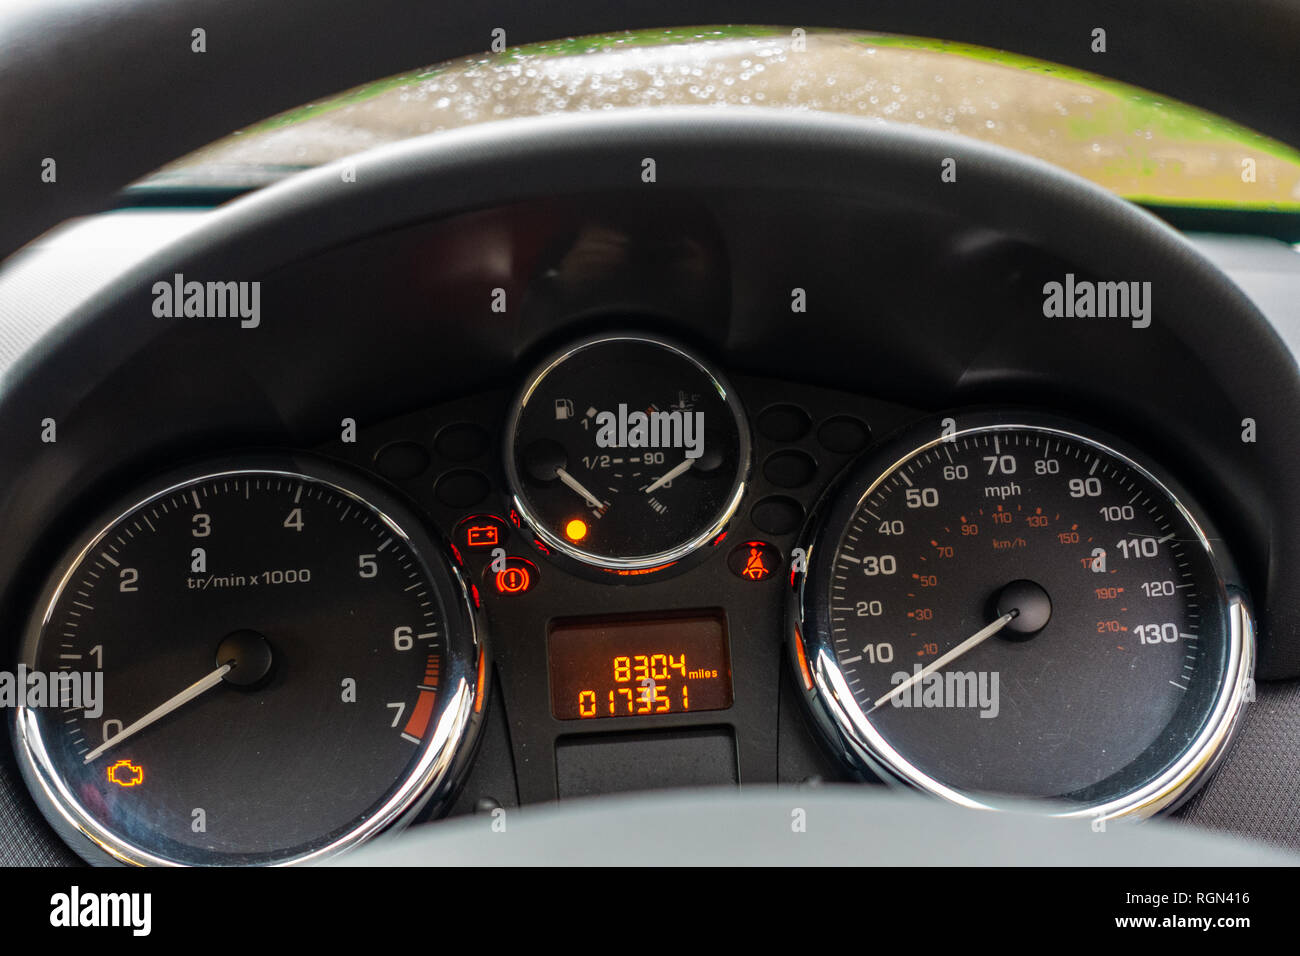 Dashboard and dials on a Peugeot 207 car Stock Photo - Alamy